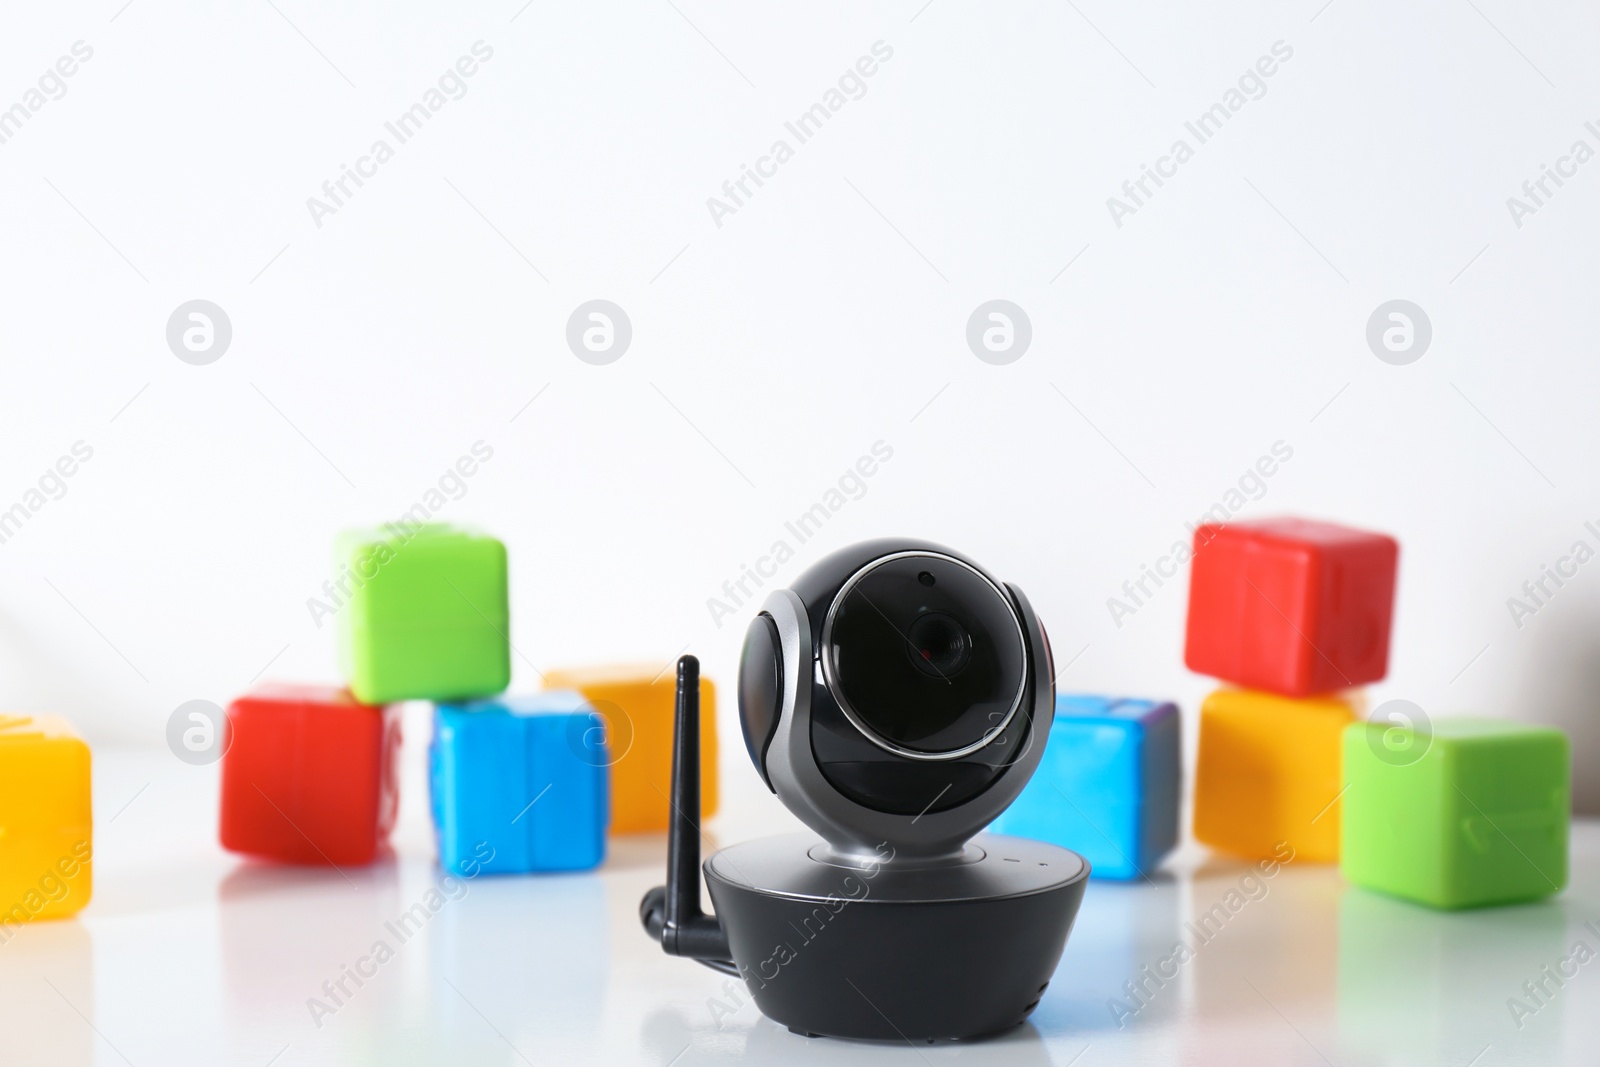 Photo of Modern CCTV security camera and colorful cubes on table against white background. Space for text